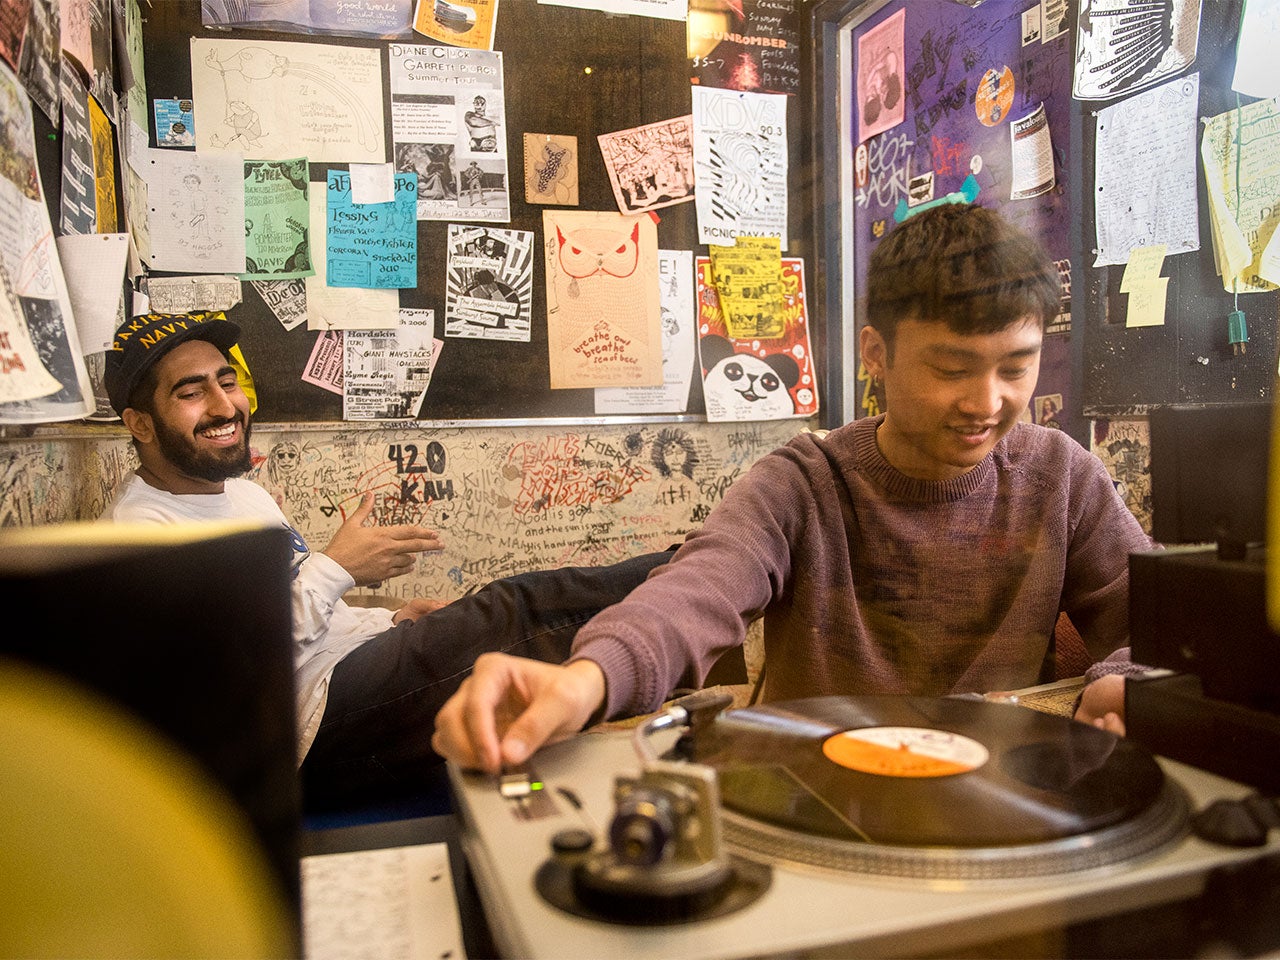 A ˽̳ Davis student works a record player in a radio studio while another student sits in front of the poster-filled back wall, smiling.